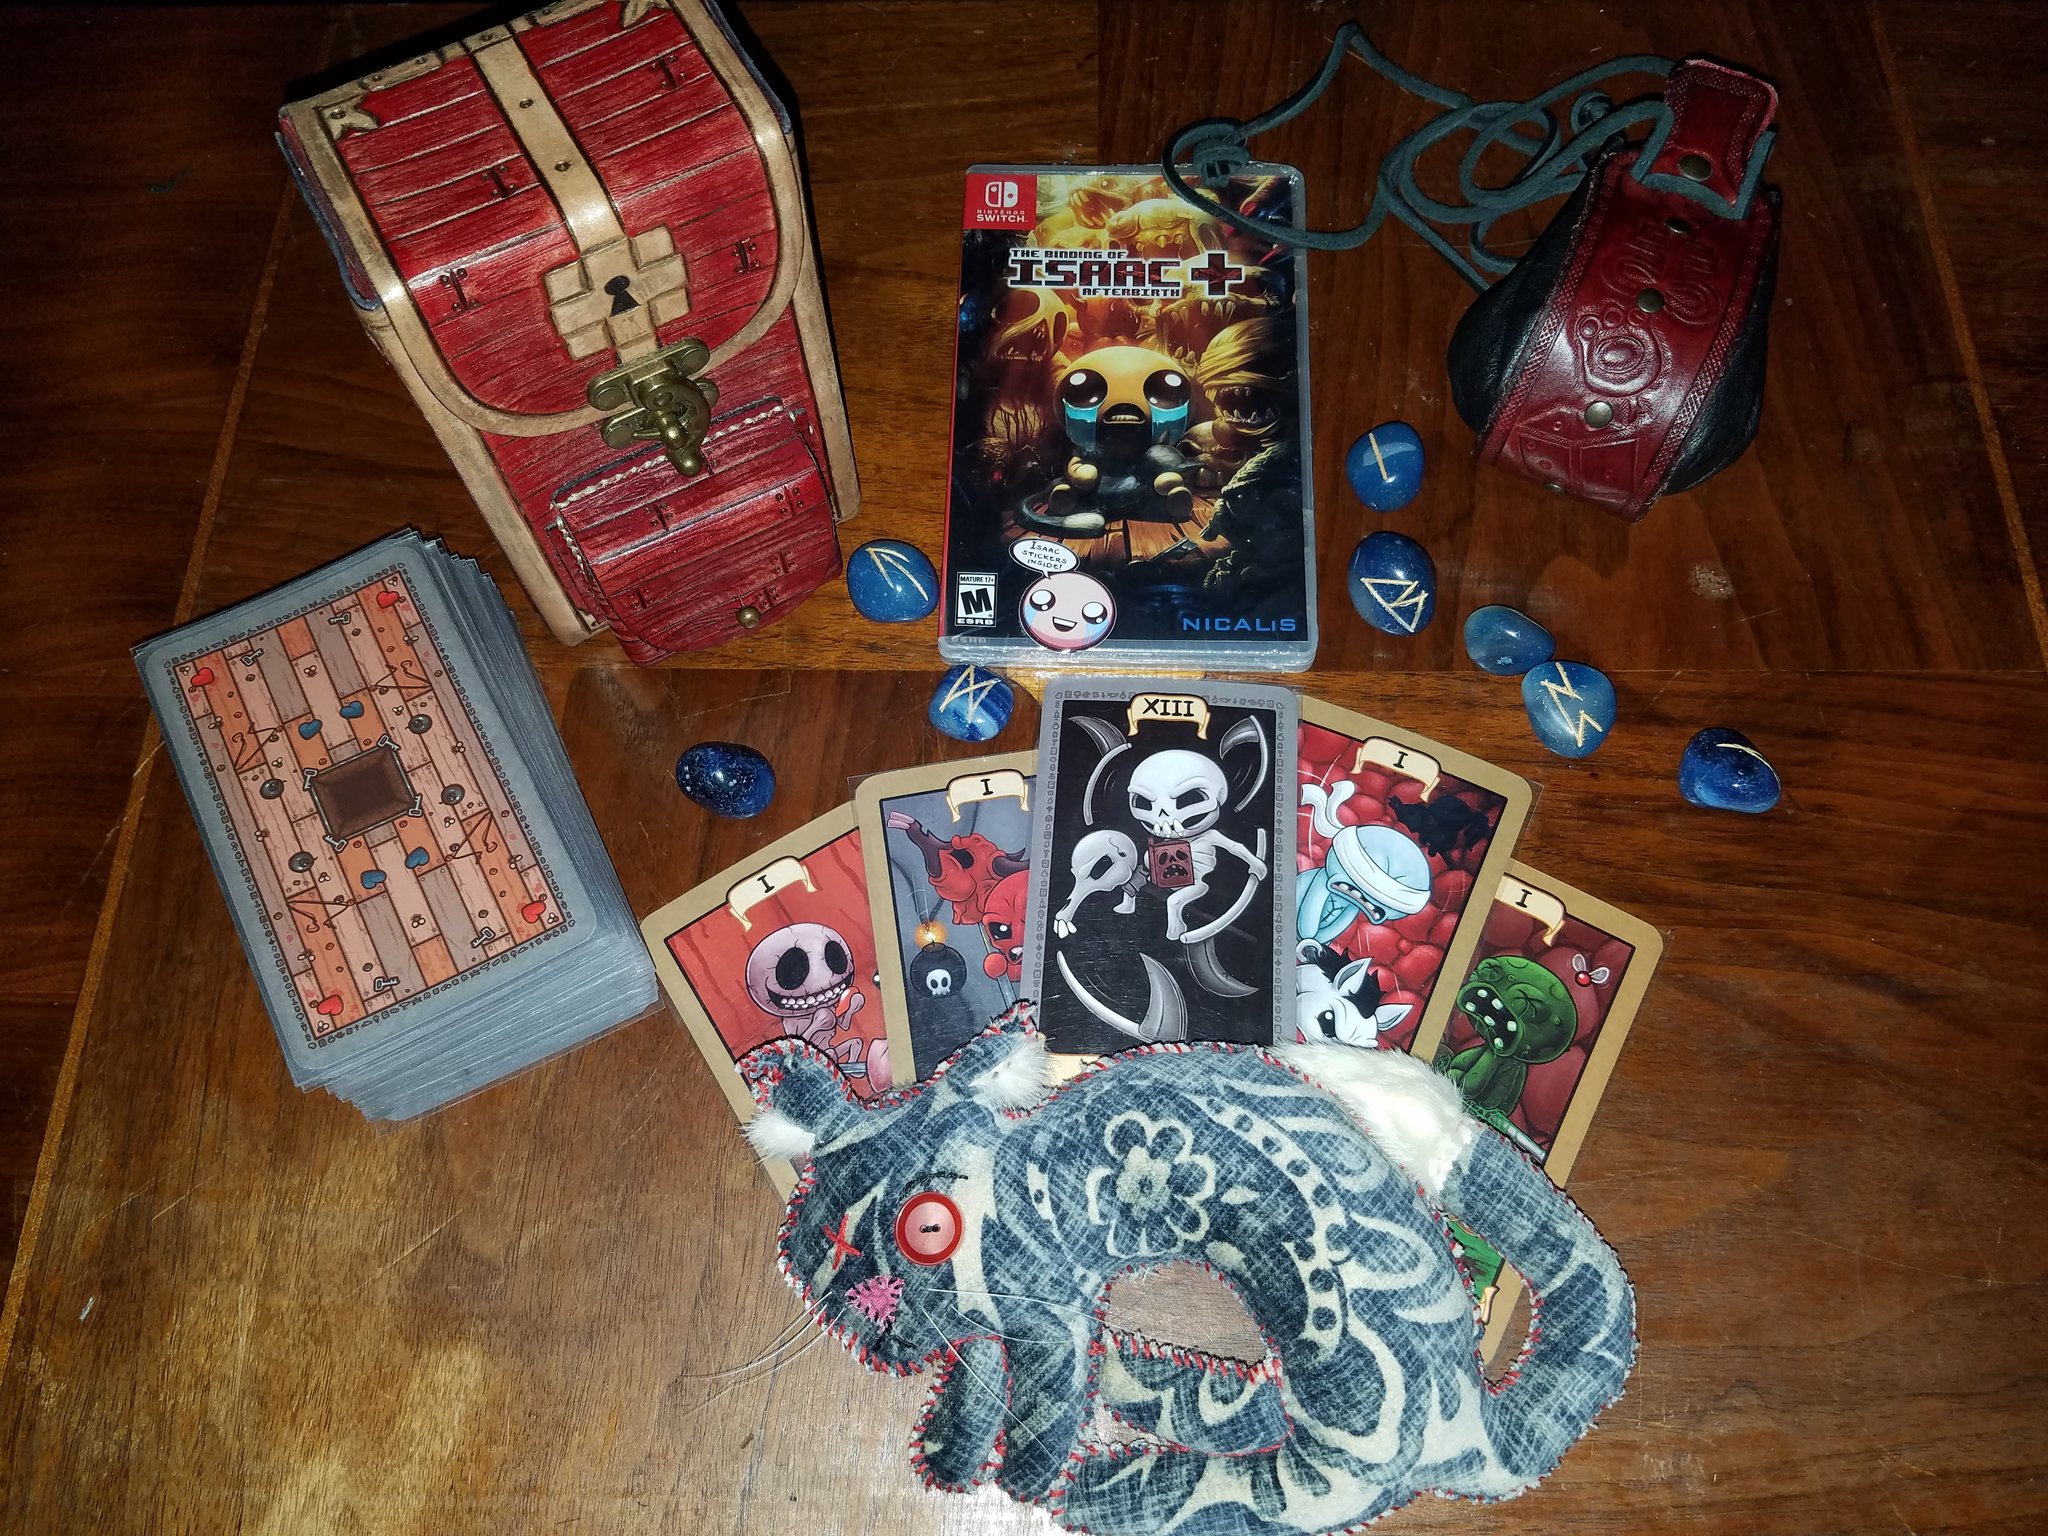 Tikara on Twitter: "The Binding of Isaac Tarot Deck is probably one of my  all time favorite long term projects I've ever done, and it's finally back  on sale after years of